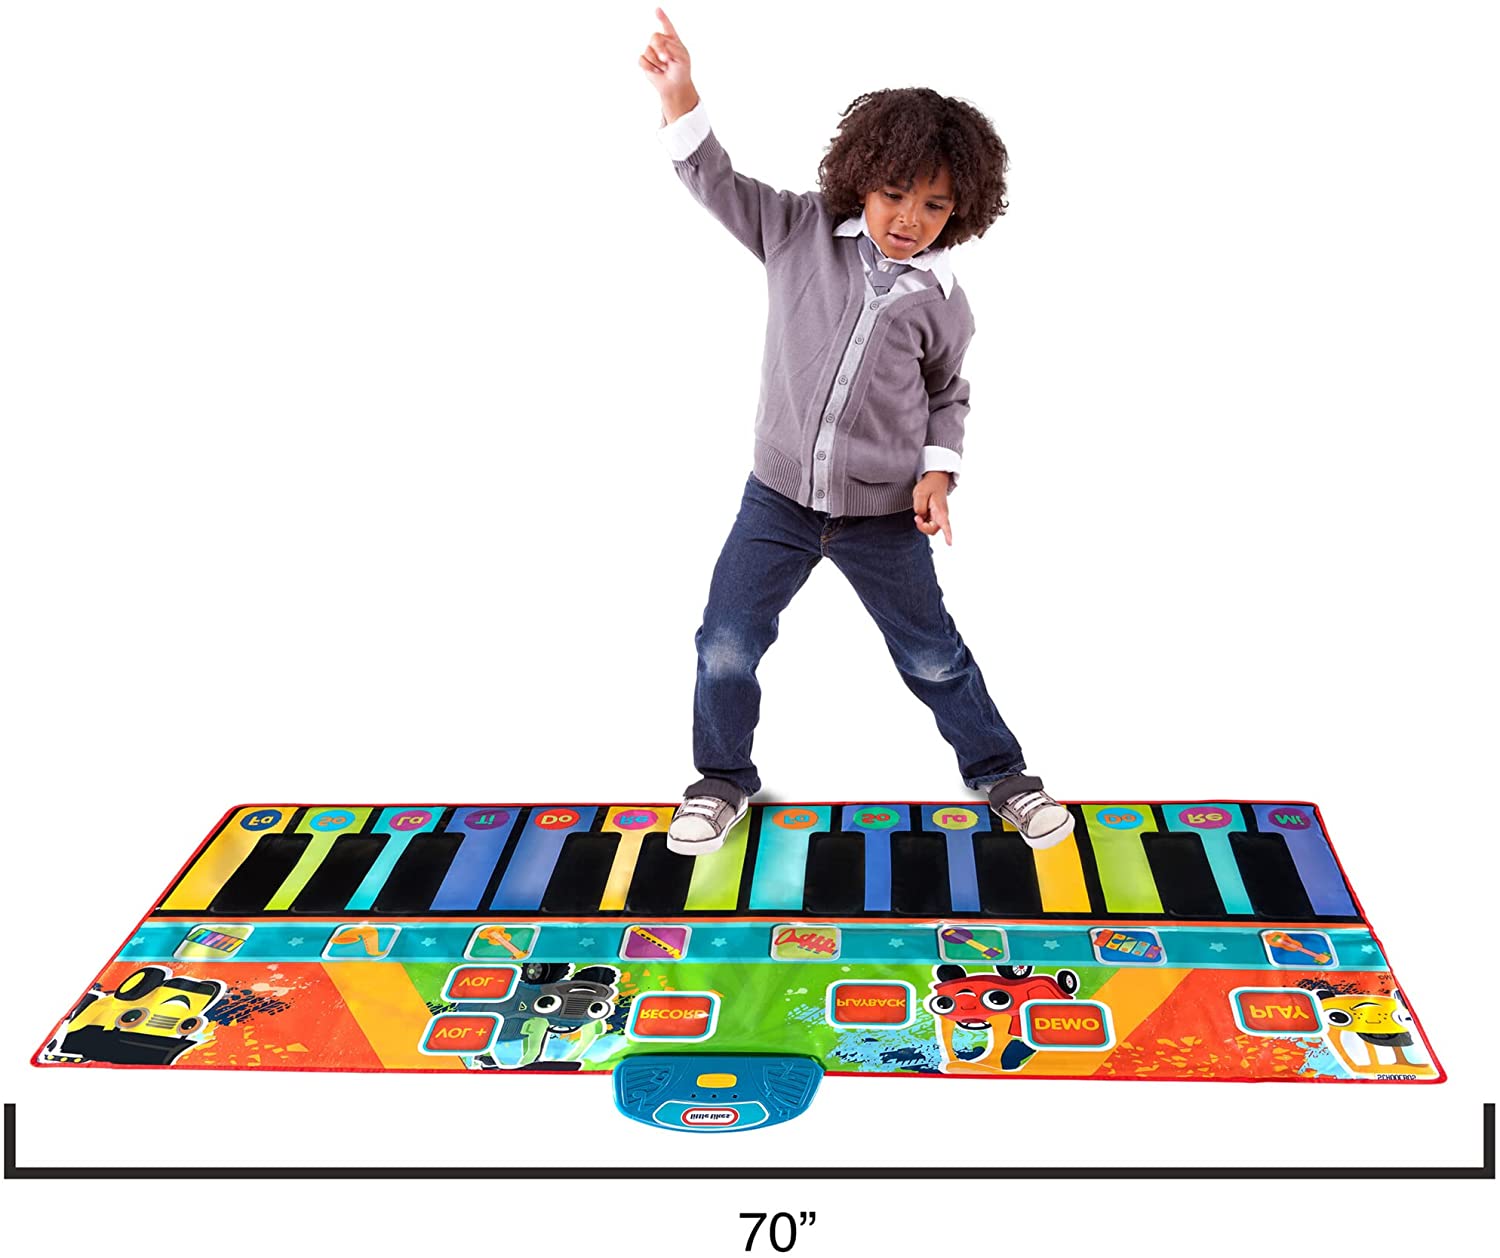 70" First Act Little Tikes Giant Musical Piano Mat w/ Record/Playback $13.75 + Free Shipping w/ Amazon Prime or Orders $25+